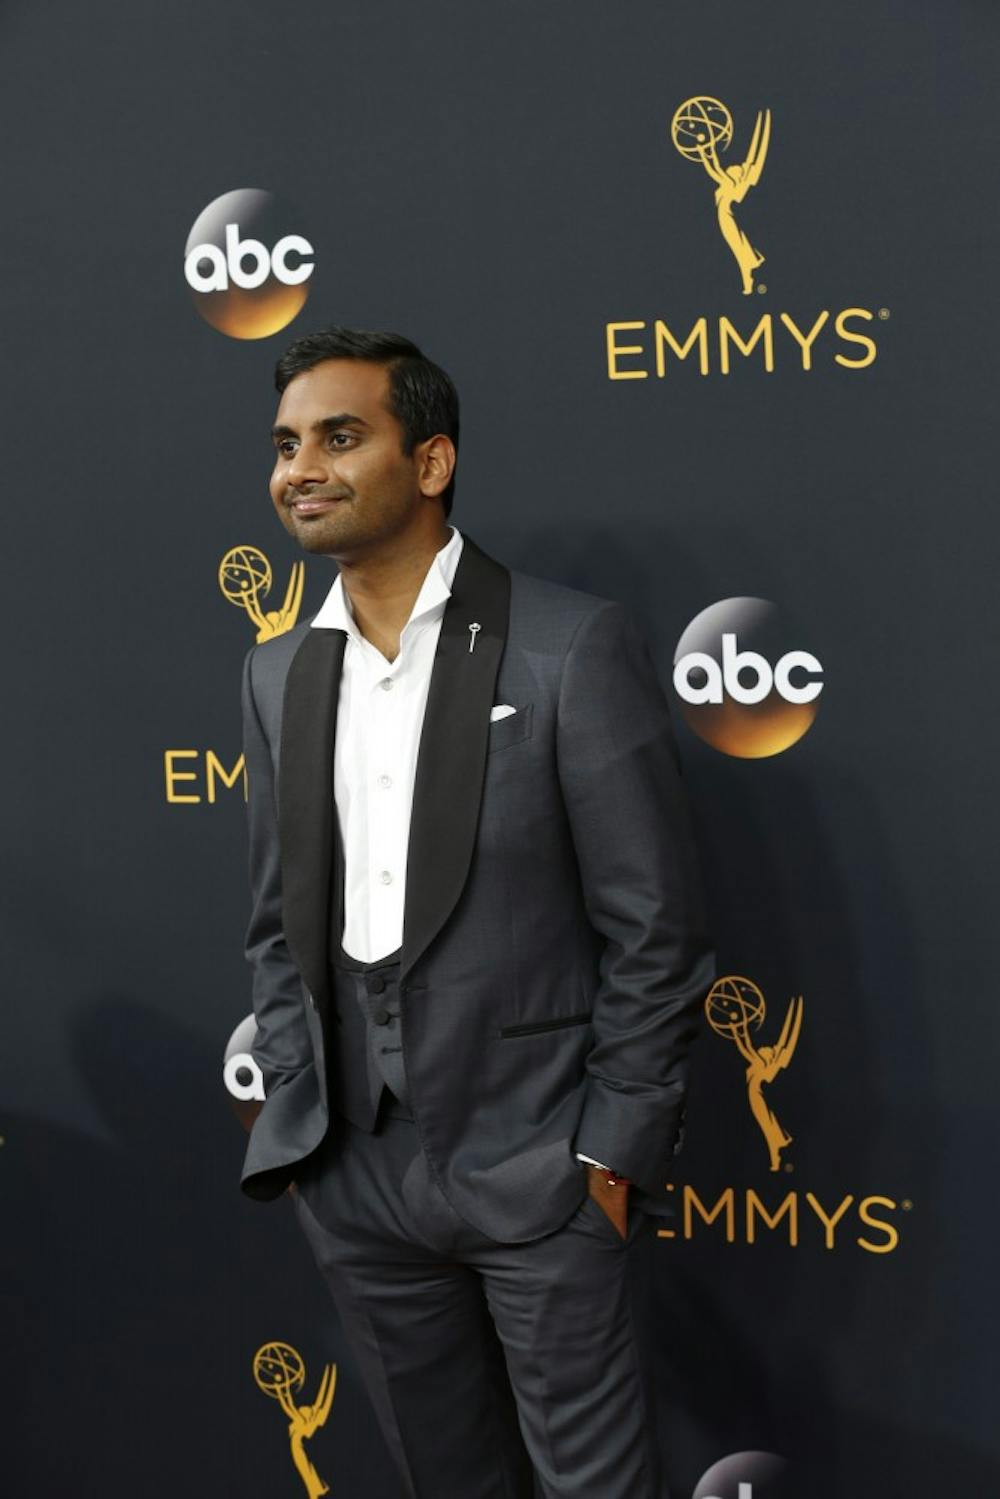 Aziz Ansari arrives at the 68th Primetime Emmy Awards at the Microsoft Theater in Los Angeles on Sunday, Sept. 18, 2016. (Kirk McKoy/Los Angeles Times/TNS)